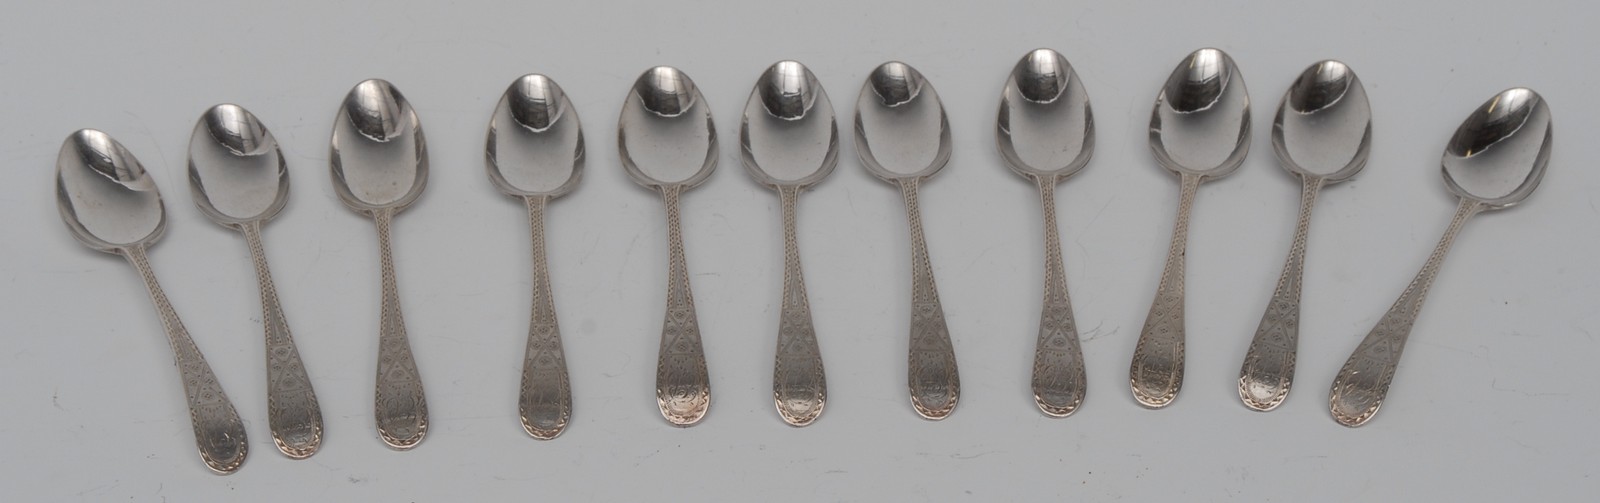 A set of eleven George III Bright-cut Old English pattern teaspoons, George Gray,